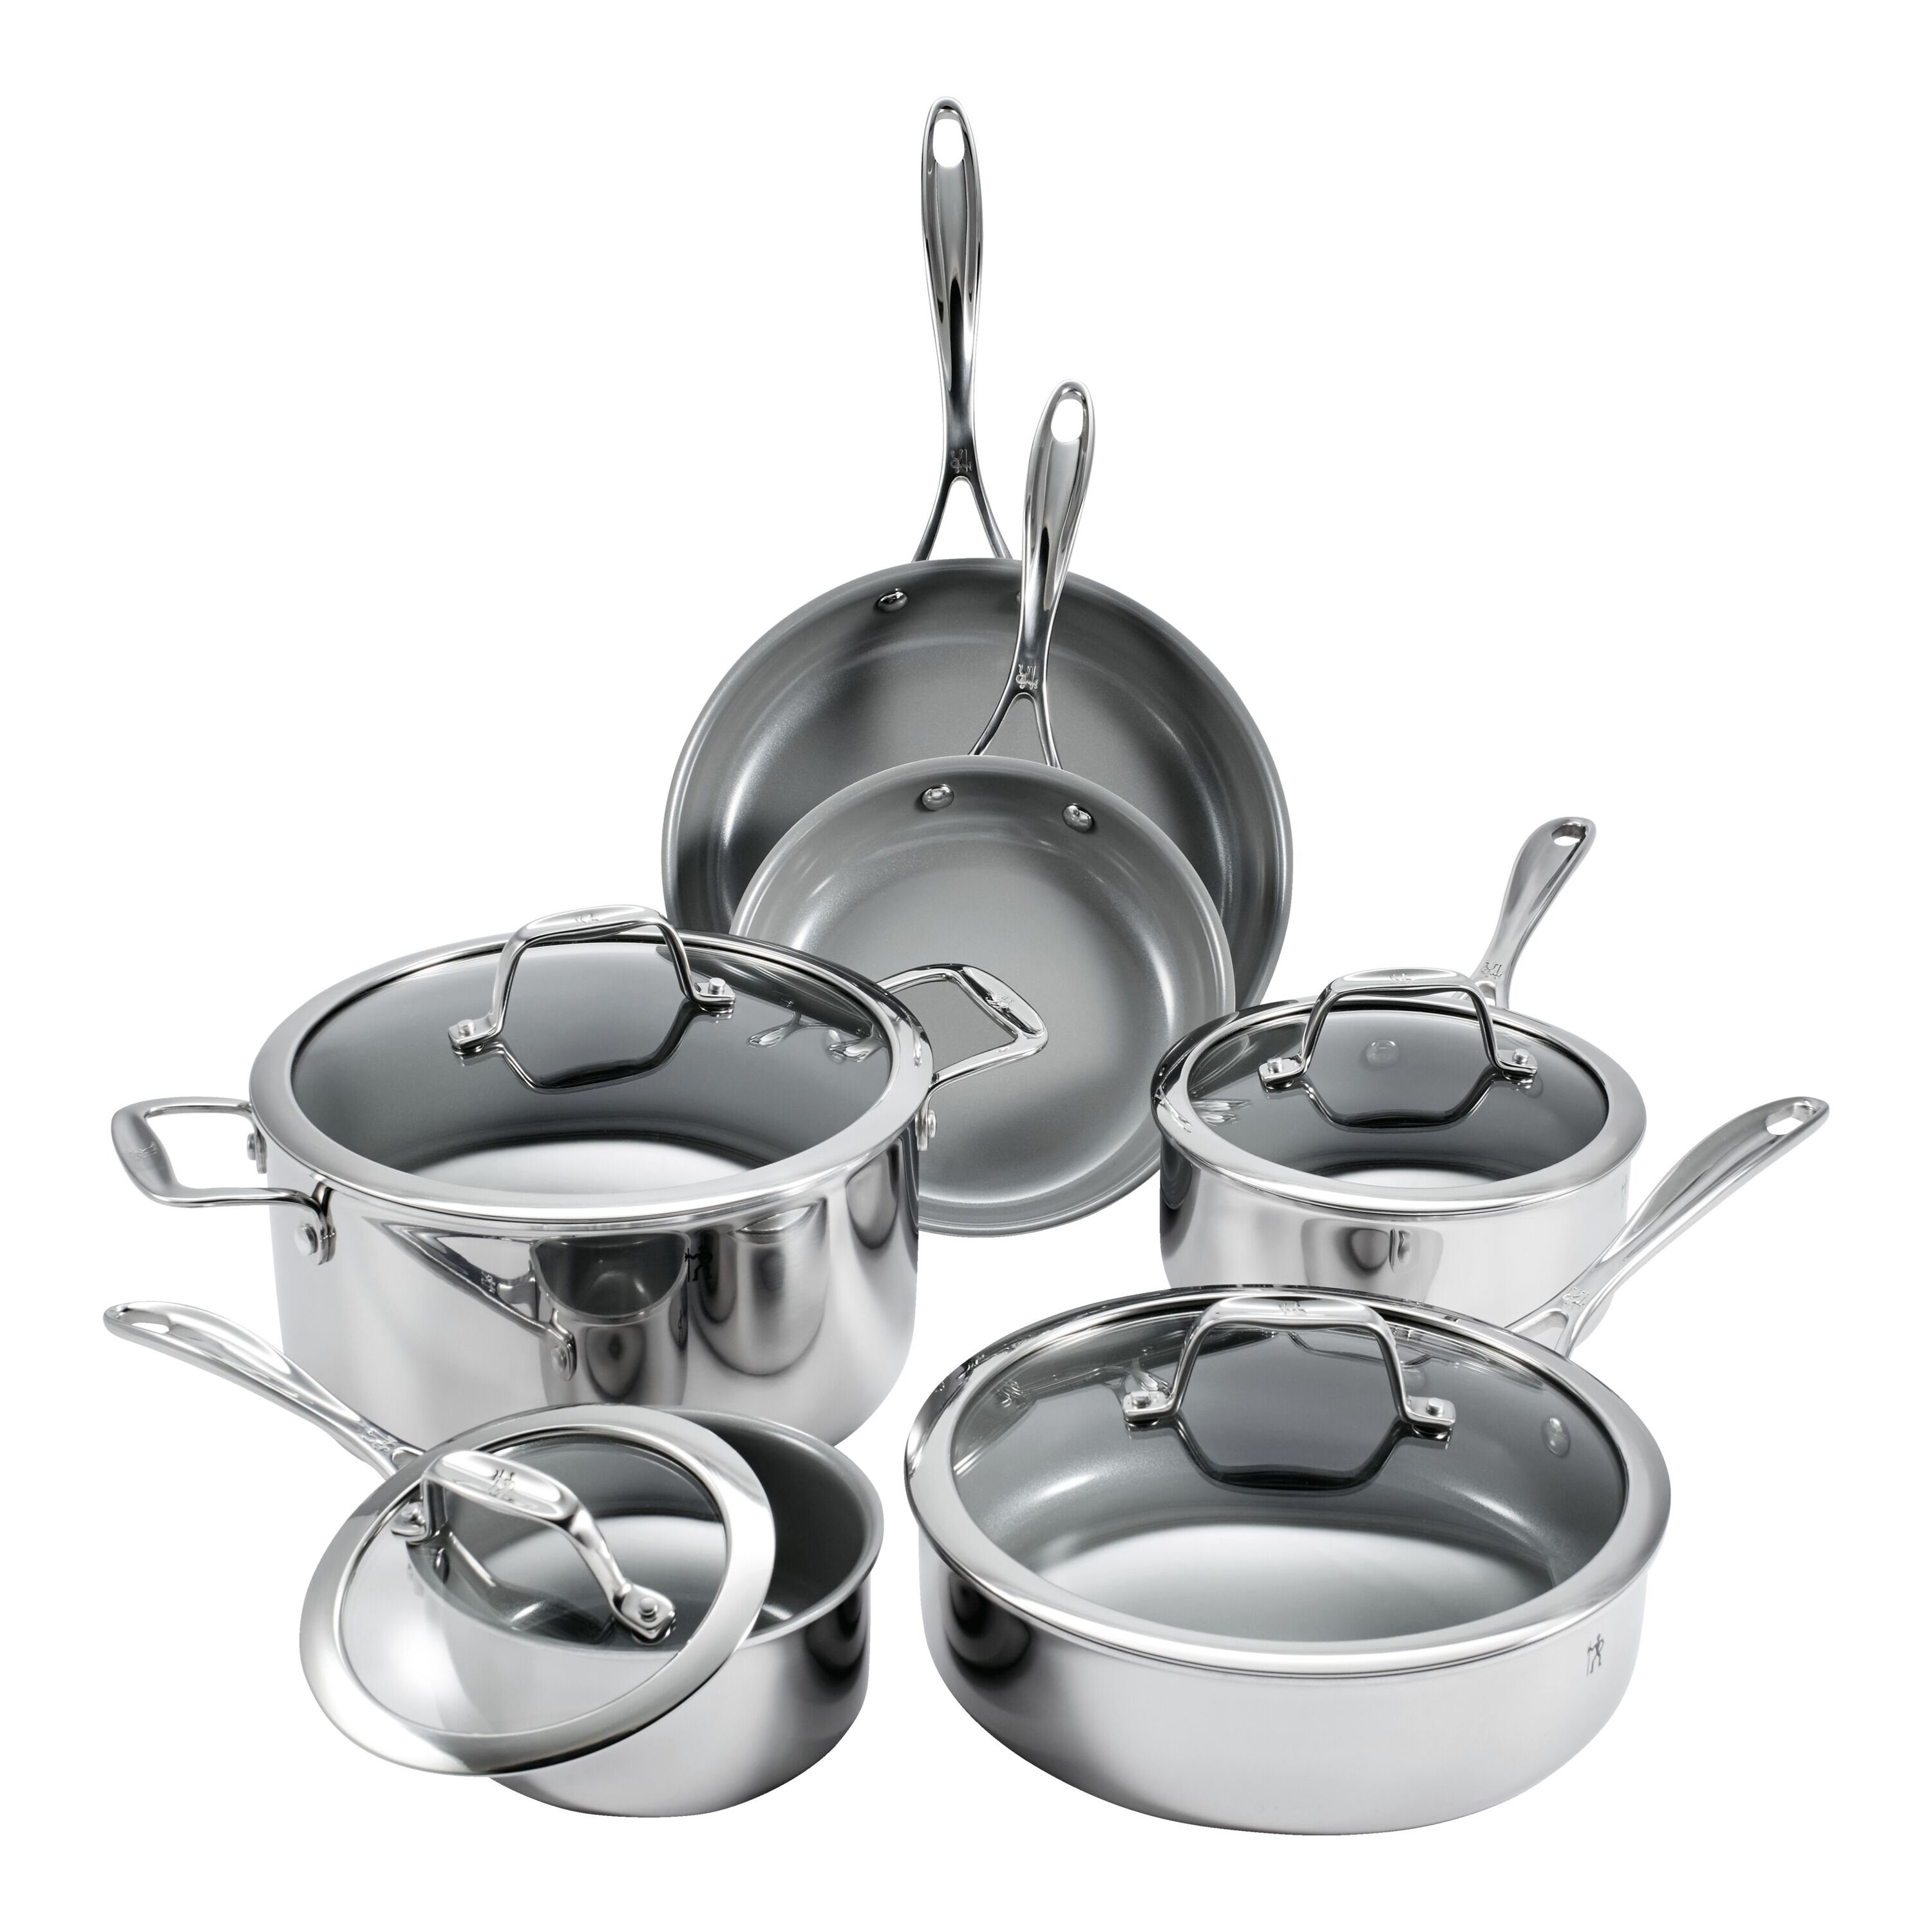 Henckels Clad Alliance 10-pc Stainless Steel Cookware Set, 10-pc